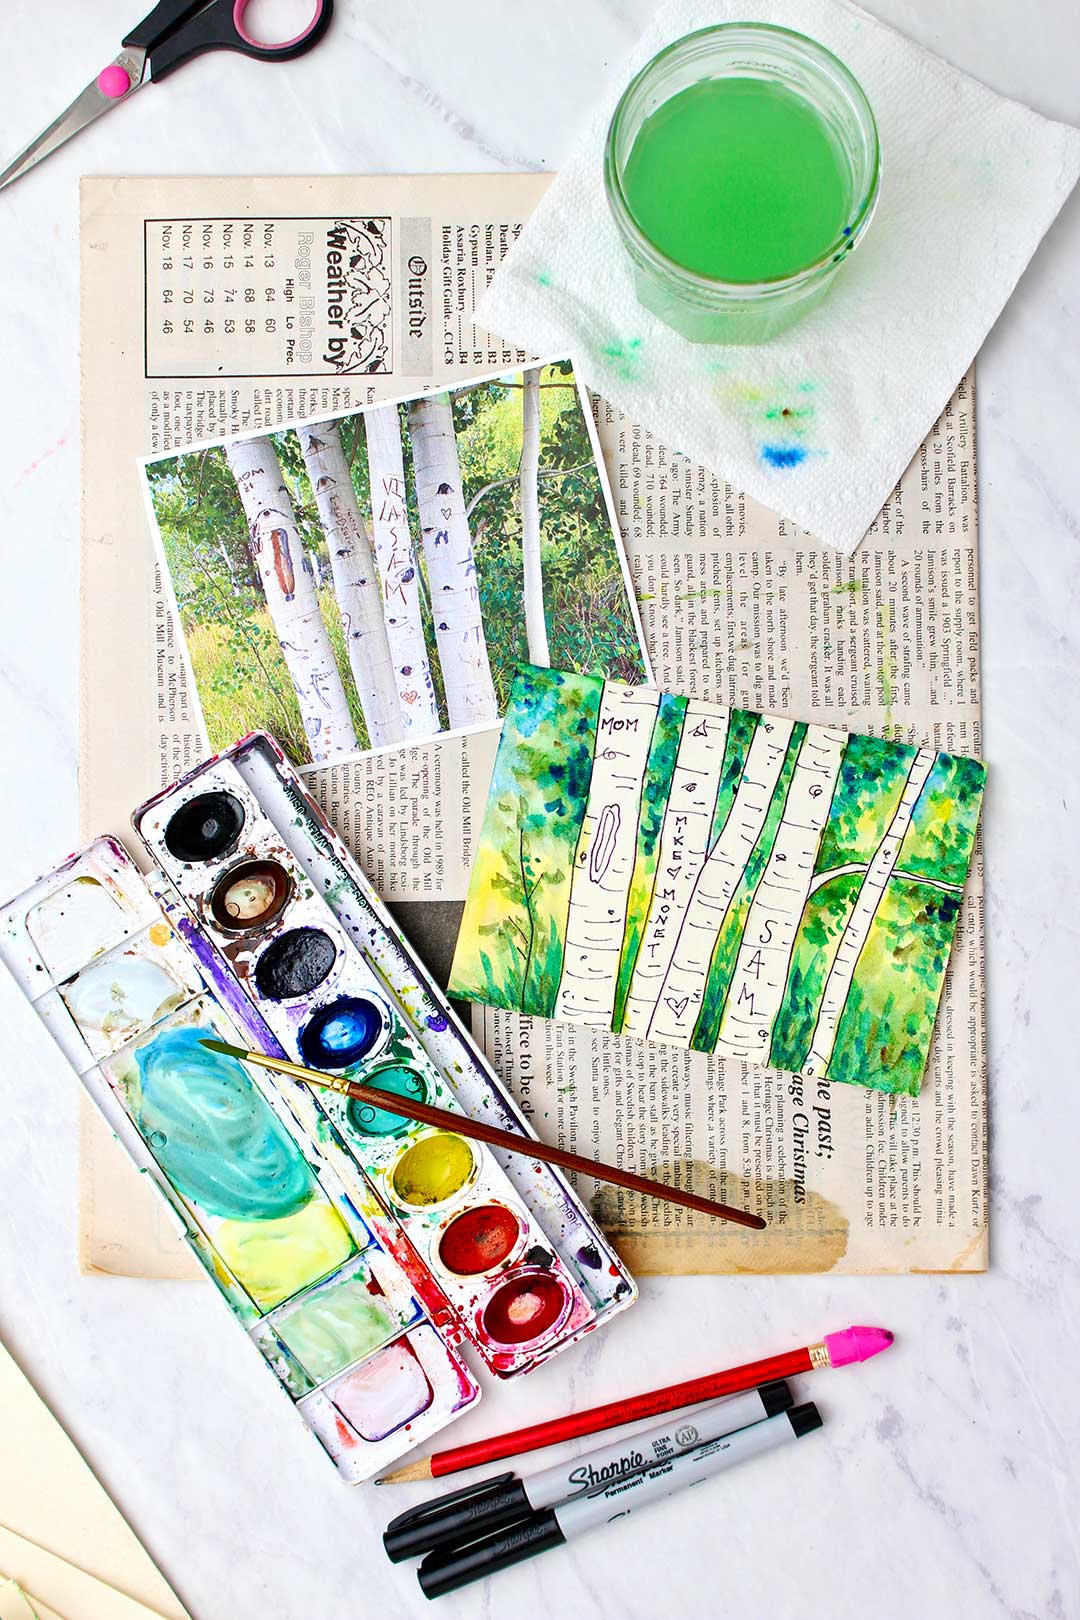 Easy How to Paint Aspen Trees In Watercolor - Welcome To Nana's